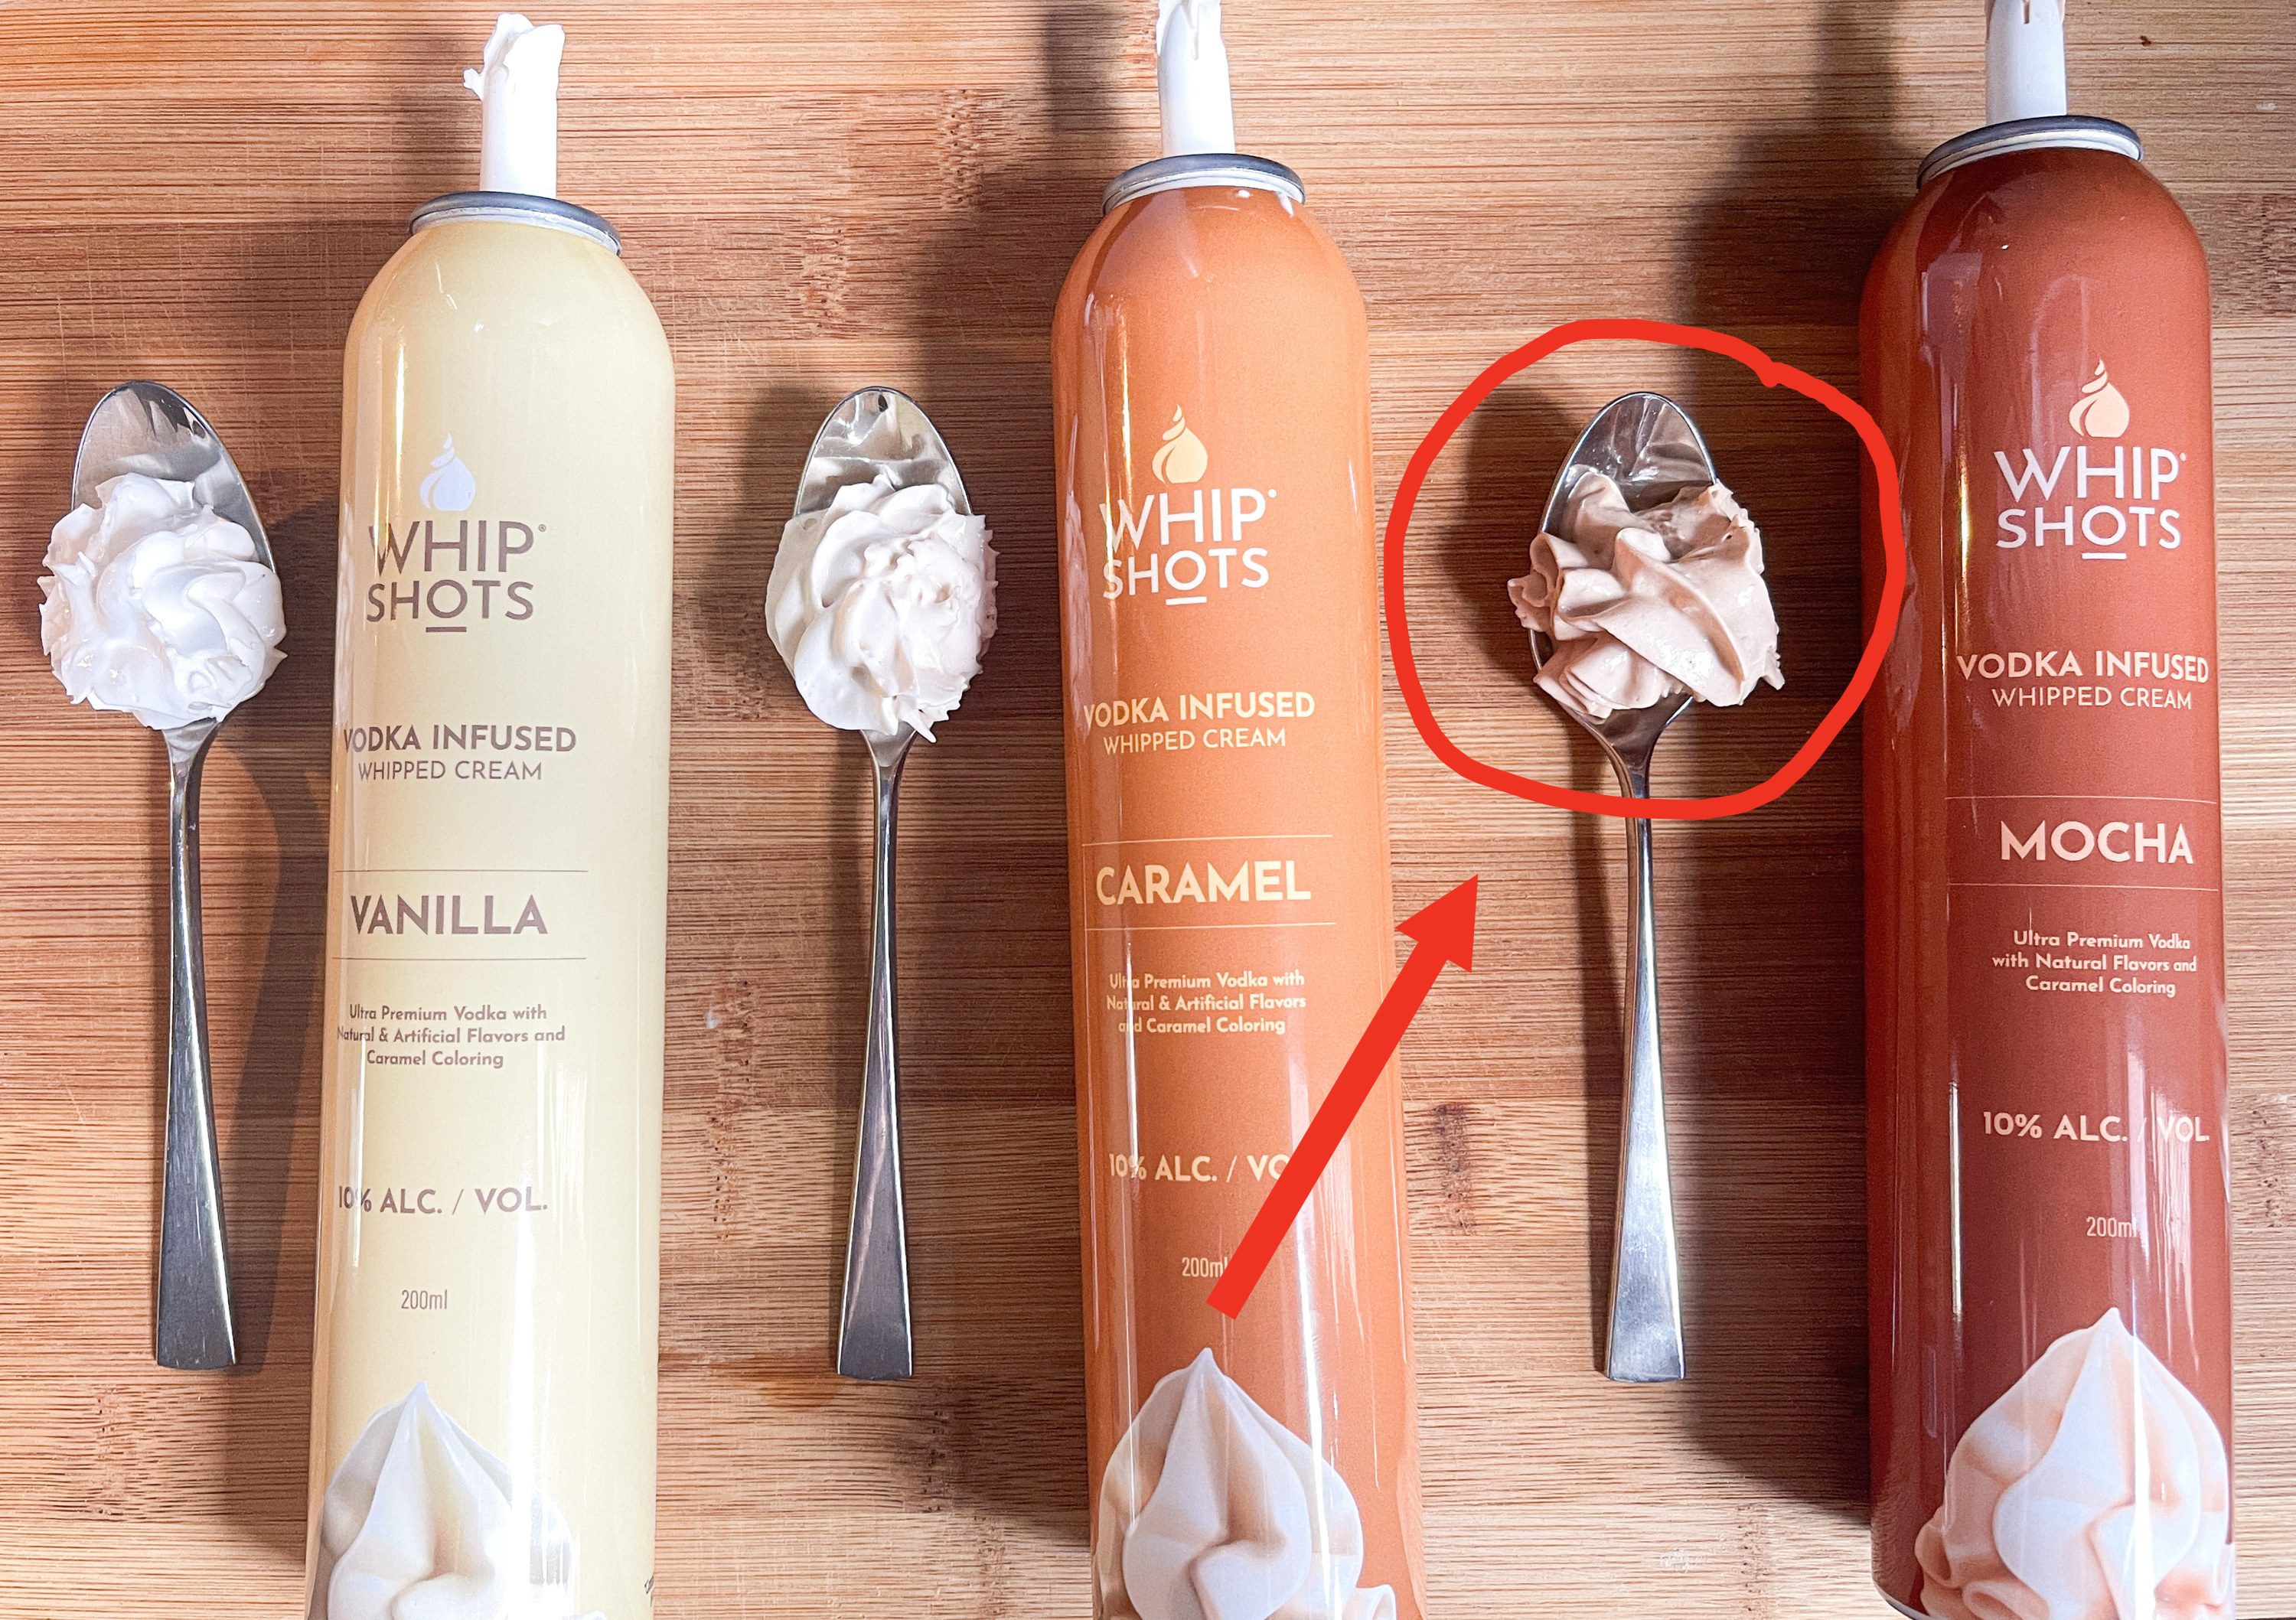 Three flavors of Whipshots (Vanilla, Caramel, and Mocha) with the whipped cream itself on three separate spoons; arrow pointing to the mocha whipped cream as the winner